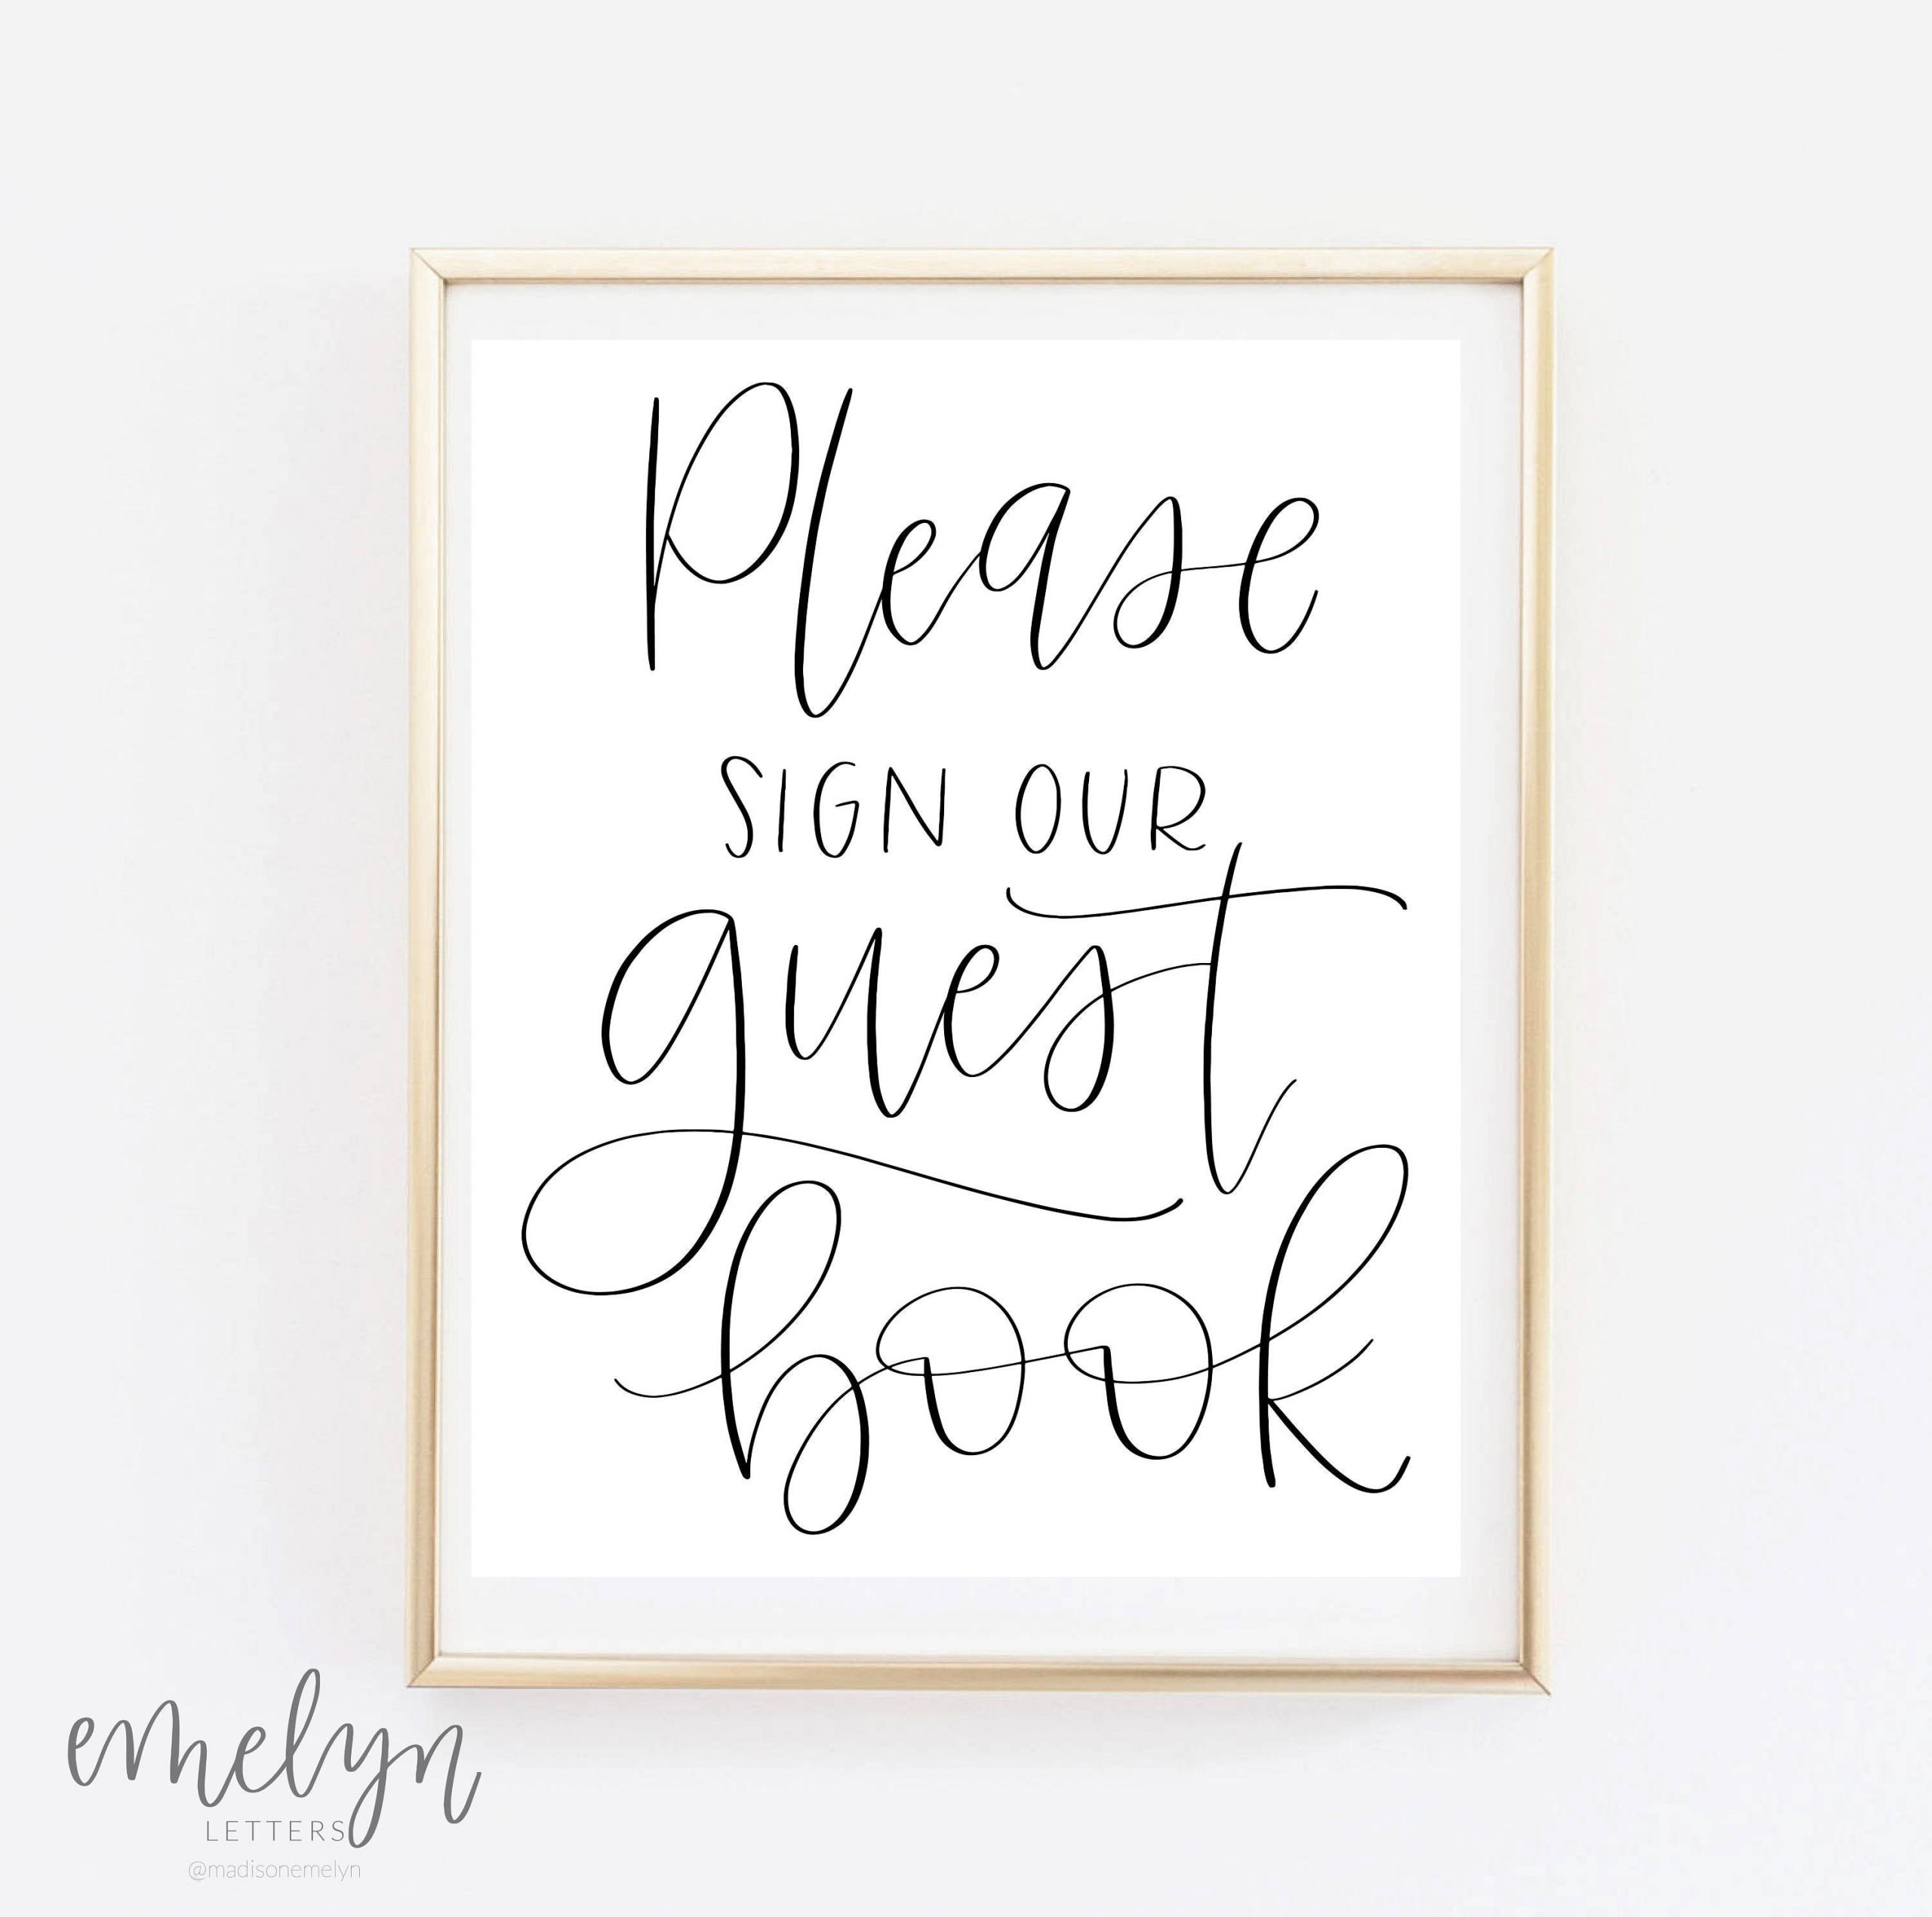 Signing Guest Book Wedding
 Please Sign Our Guest Book Wedding Print Guestbook Sign